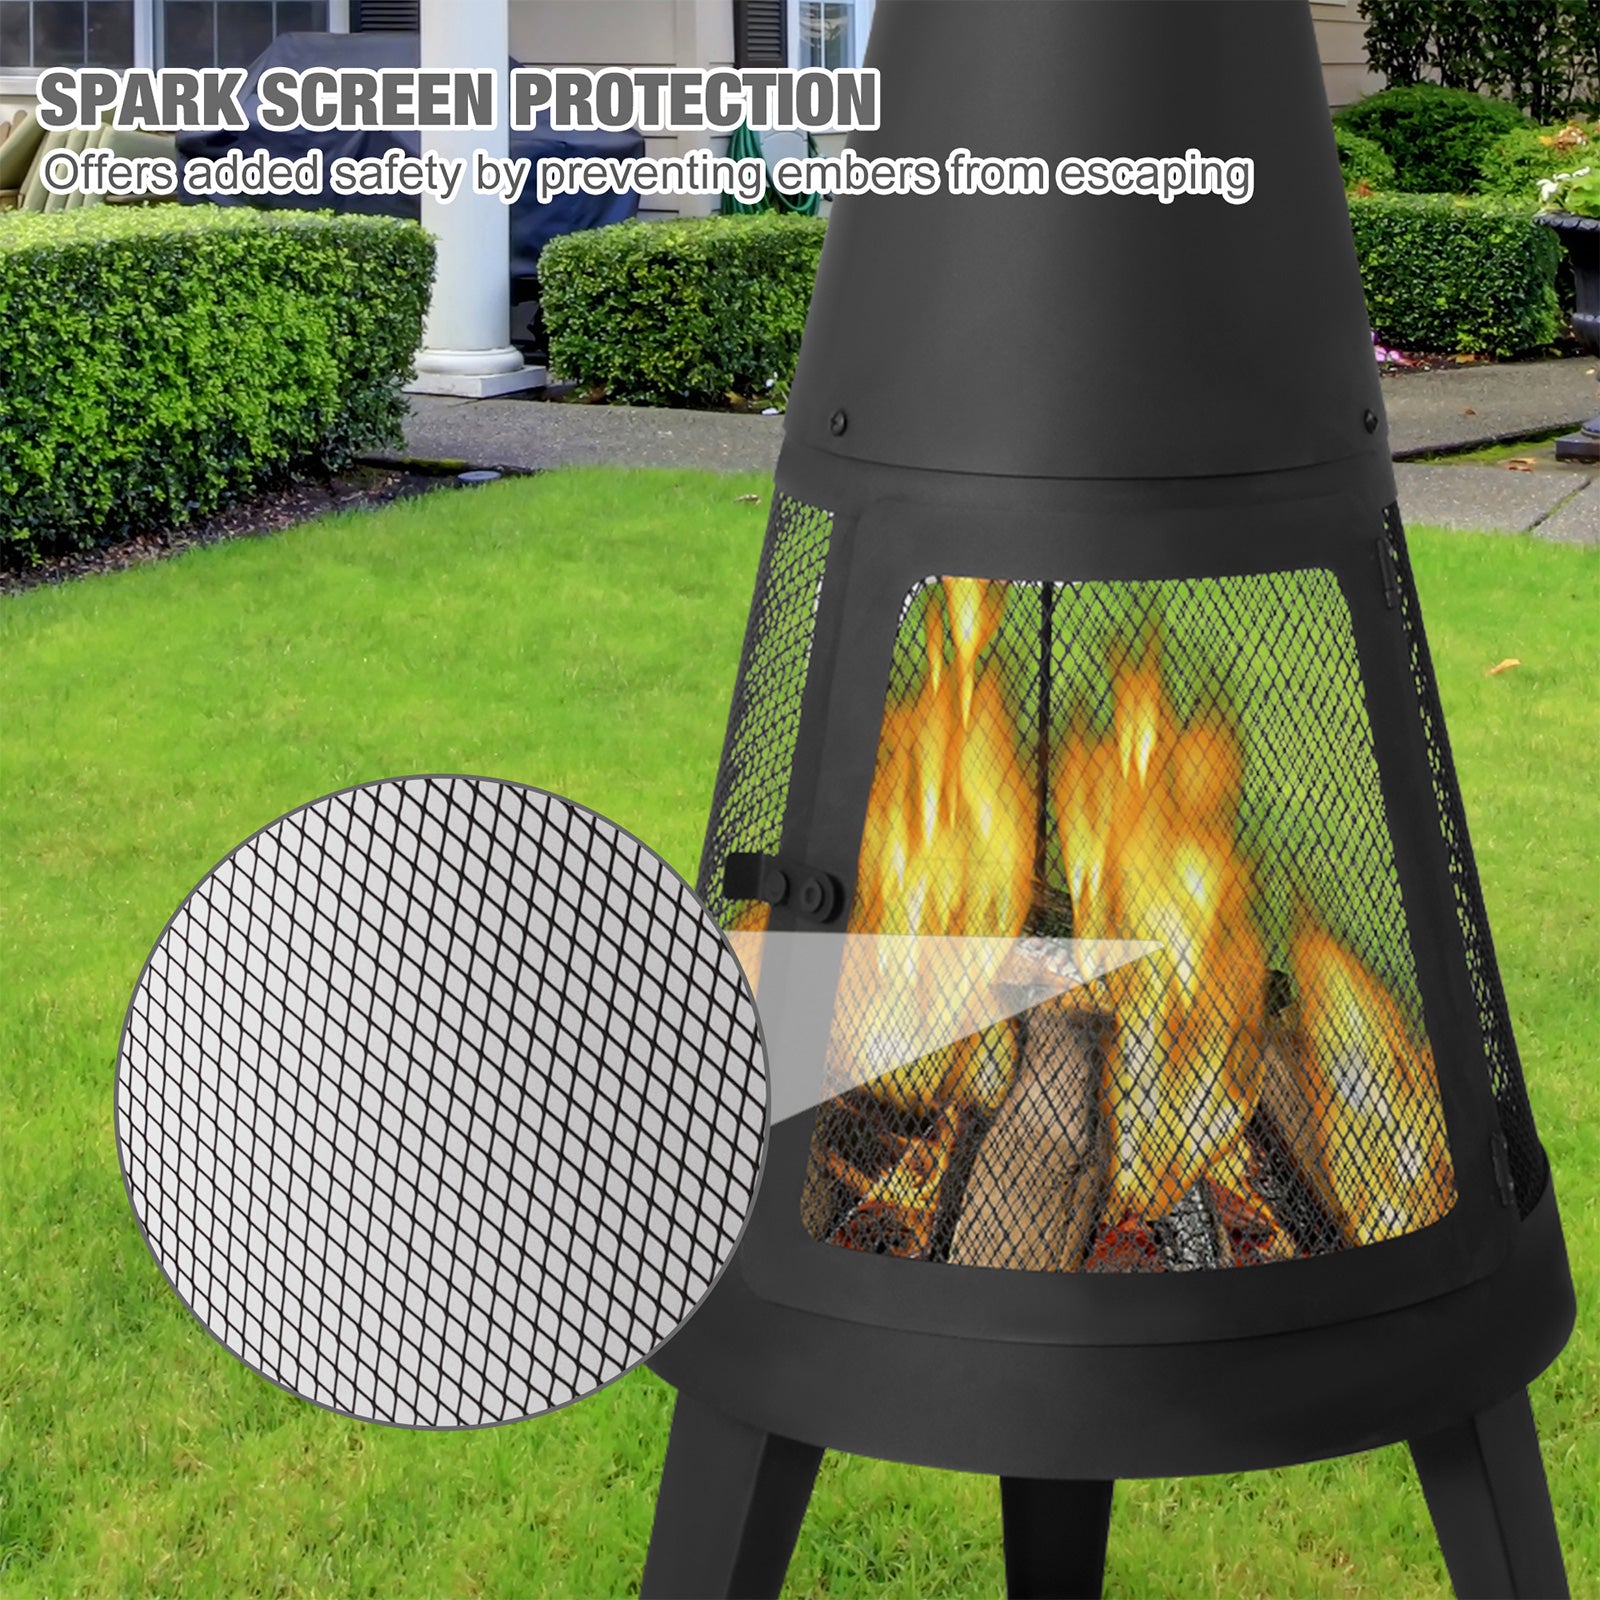 (Out of Stock) Chiminea Outdoor Fireplace 47.6" Metal Wood Burning Fire Pit with Log Grate, Black